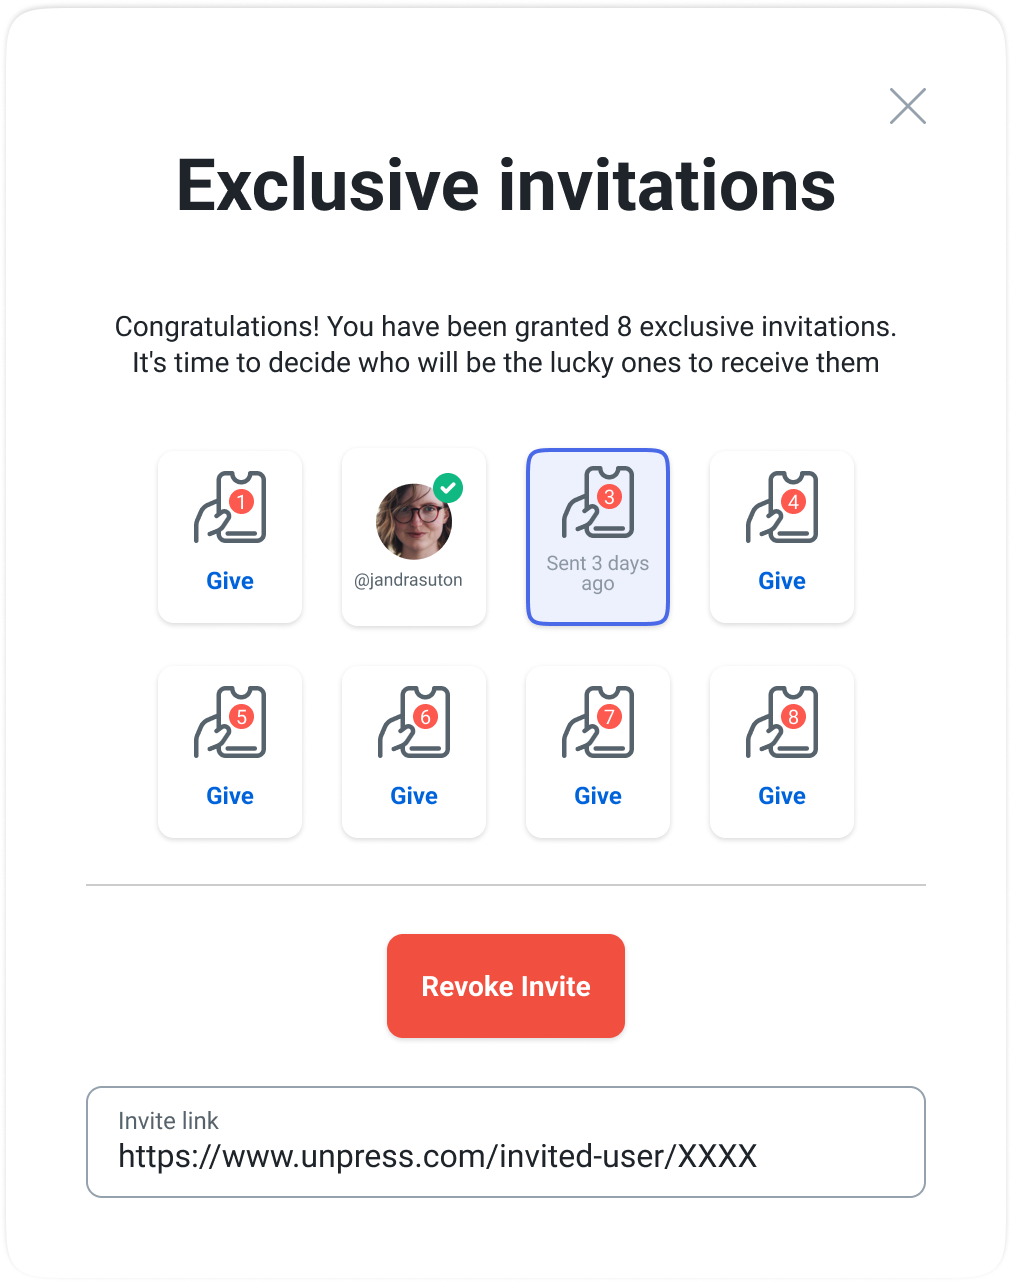 Getting an invitations unique link